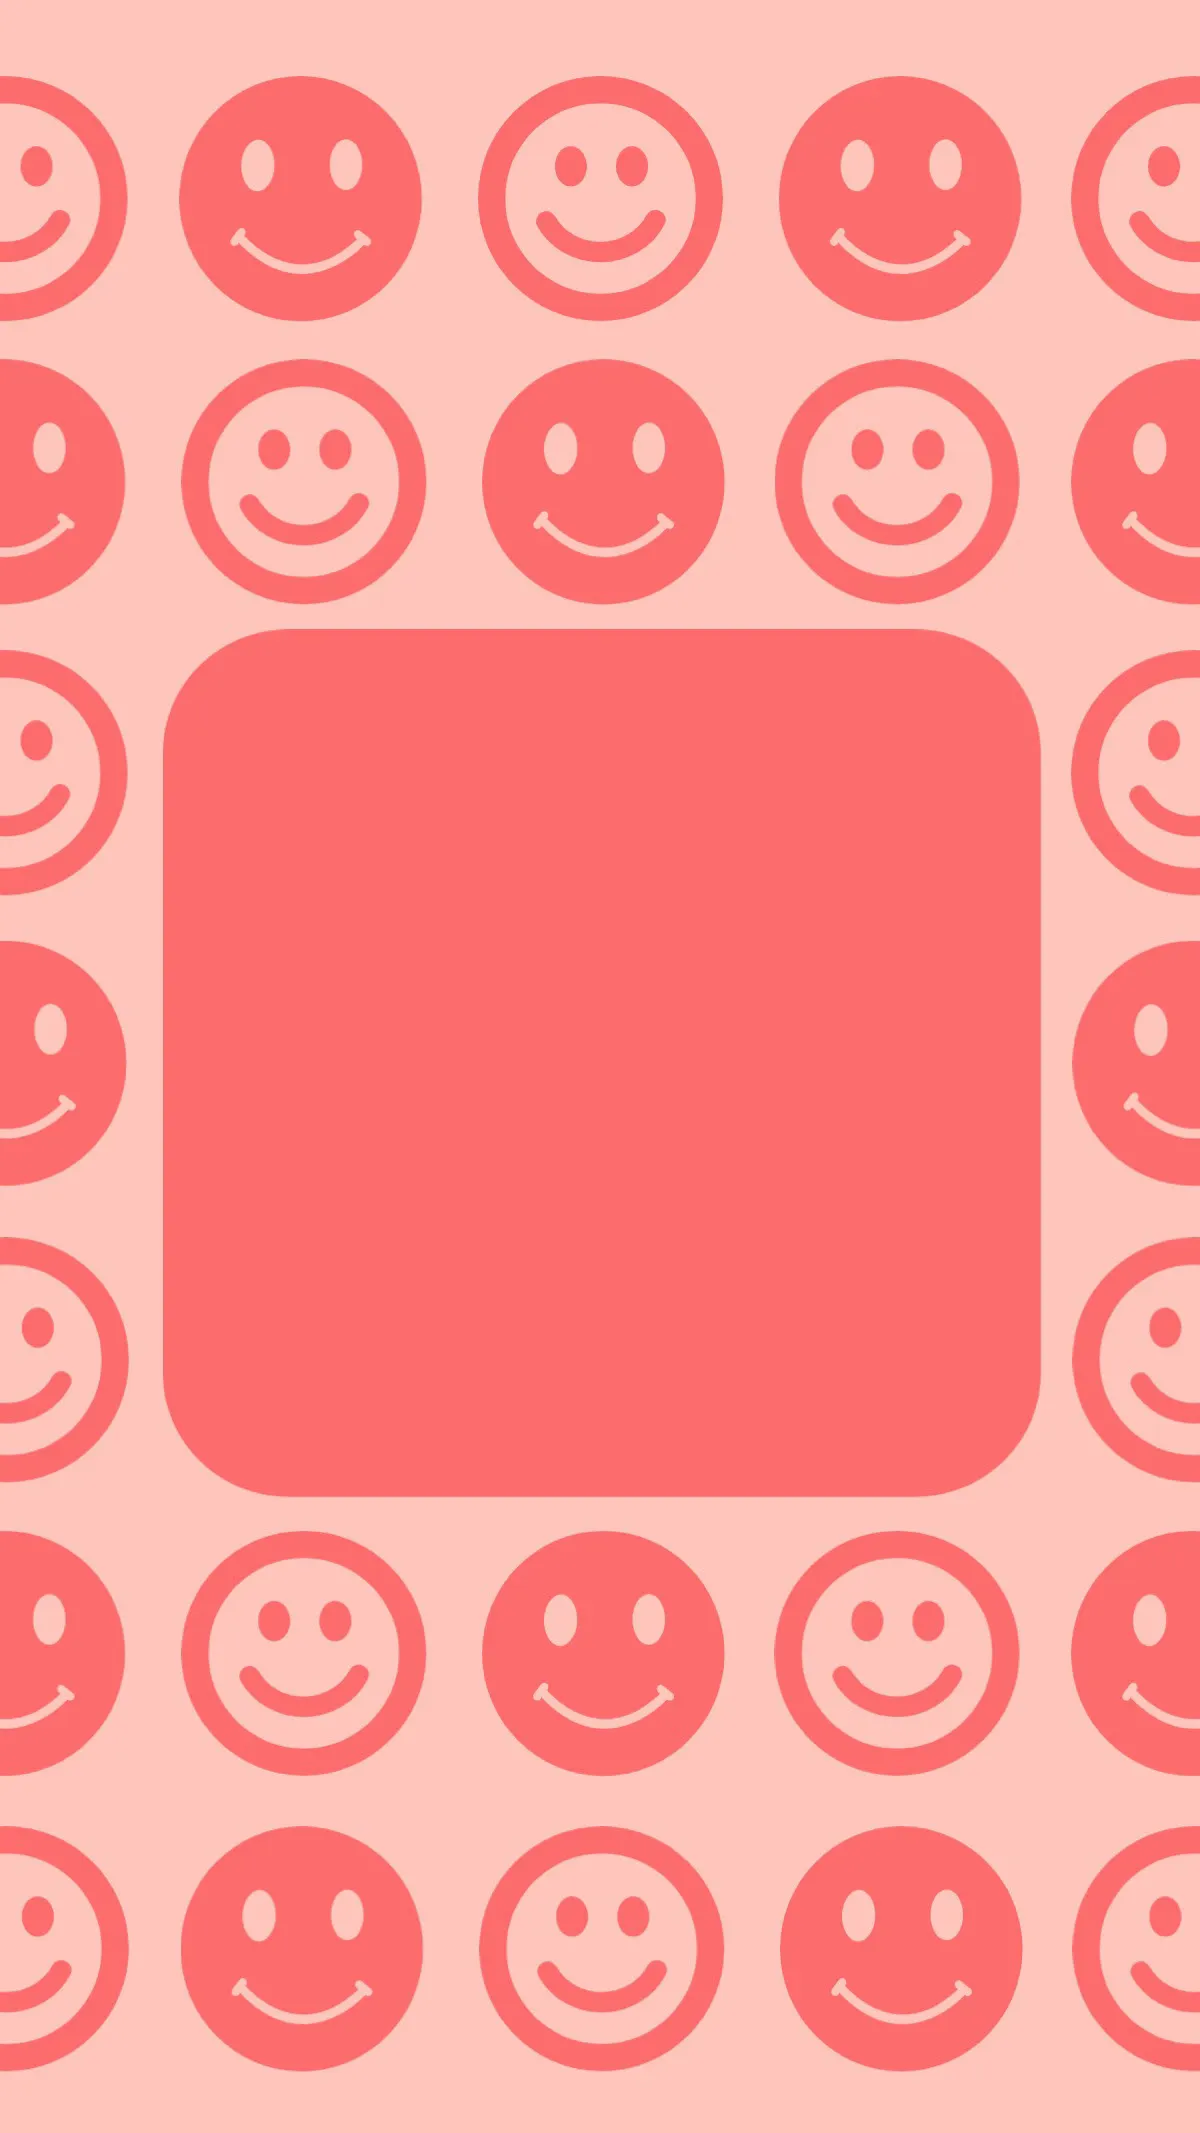 Red and Pink Smiley Face Mobile Wallpaper